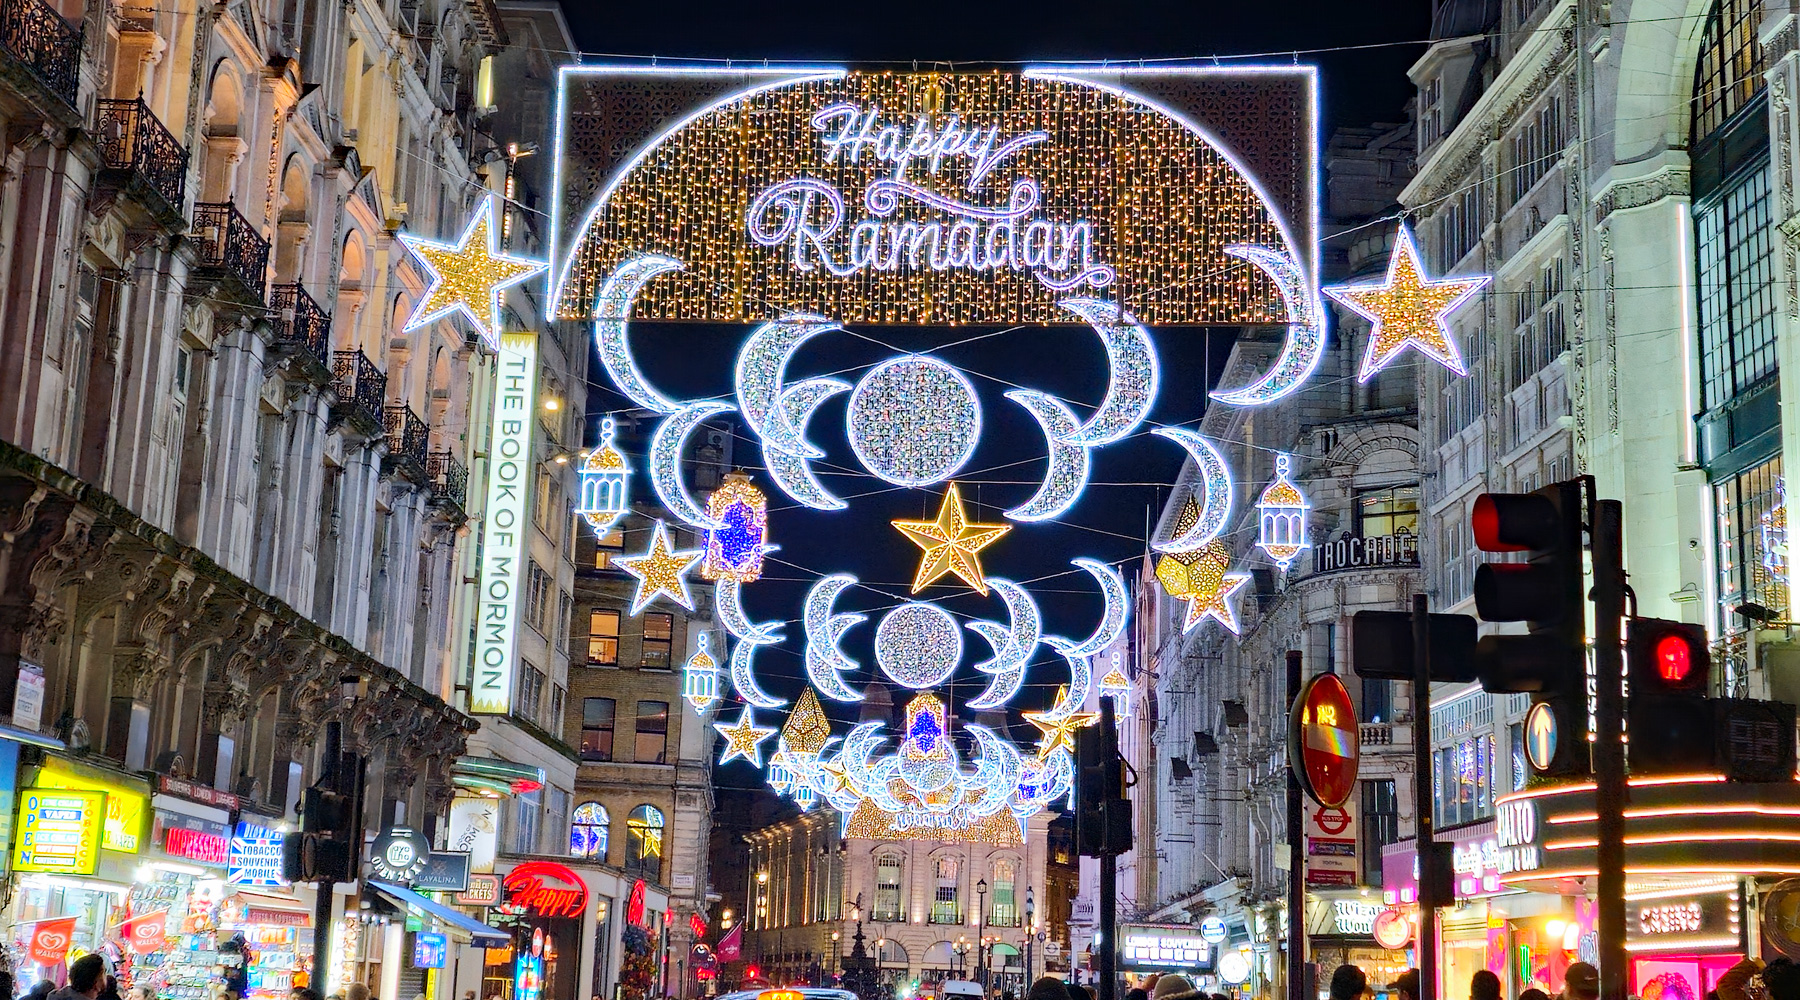 Ramadan Lights switched on near Leicester Square